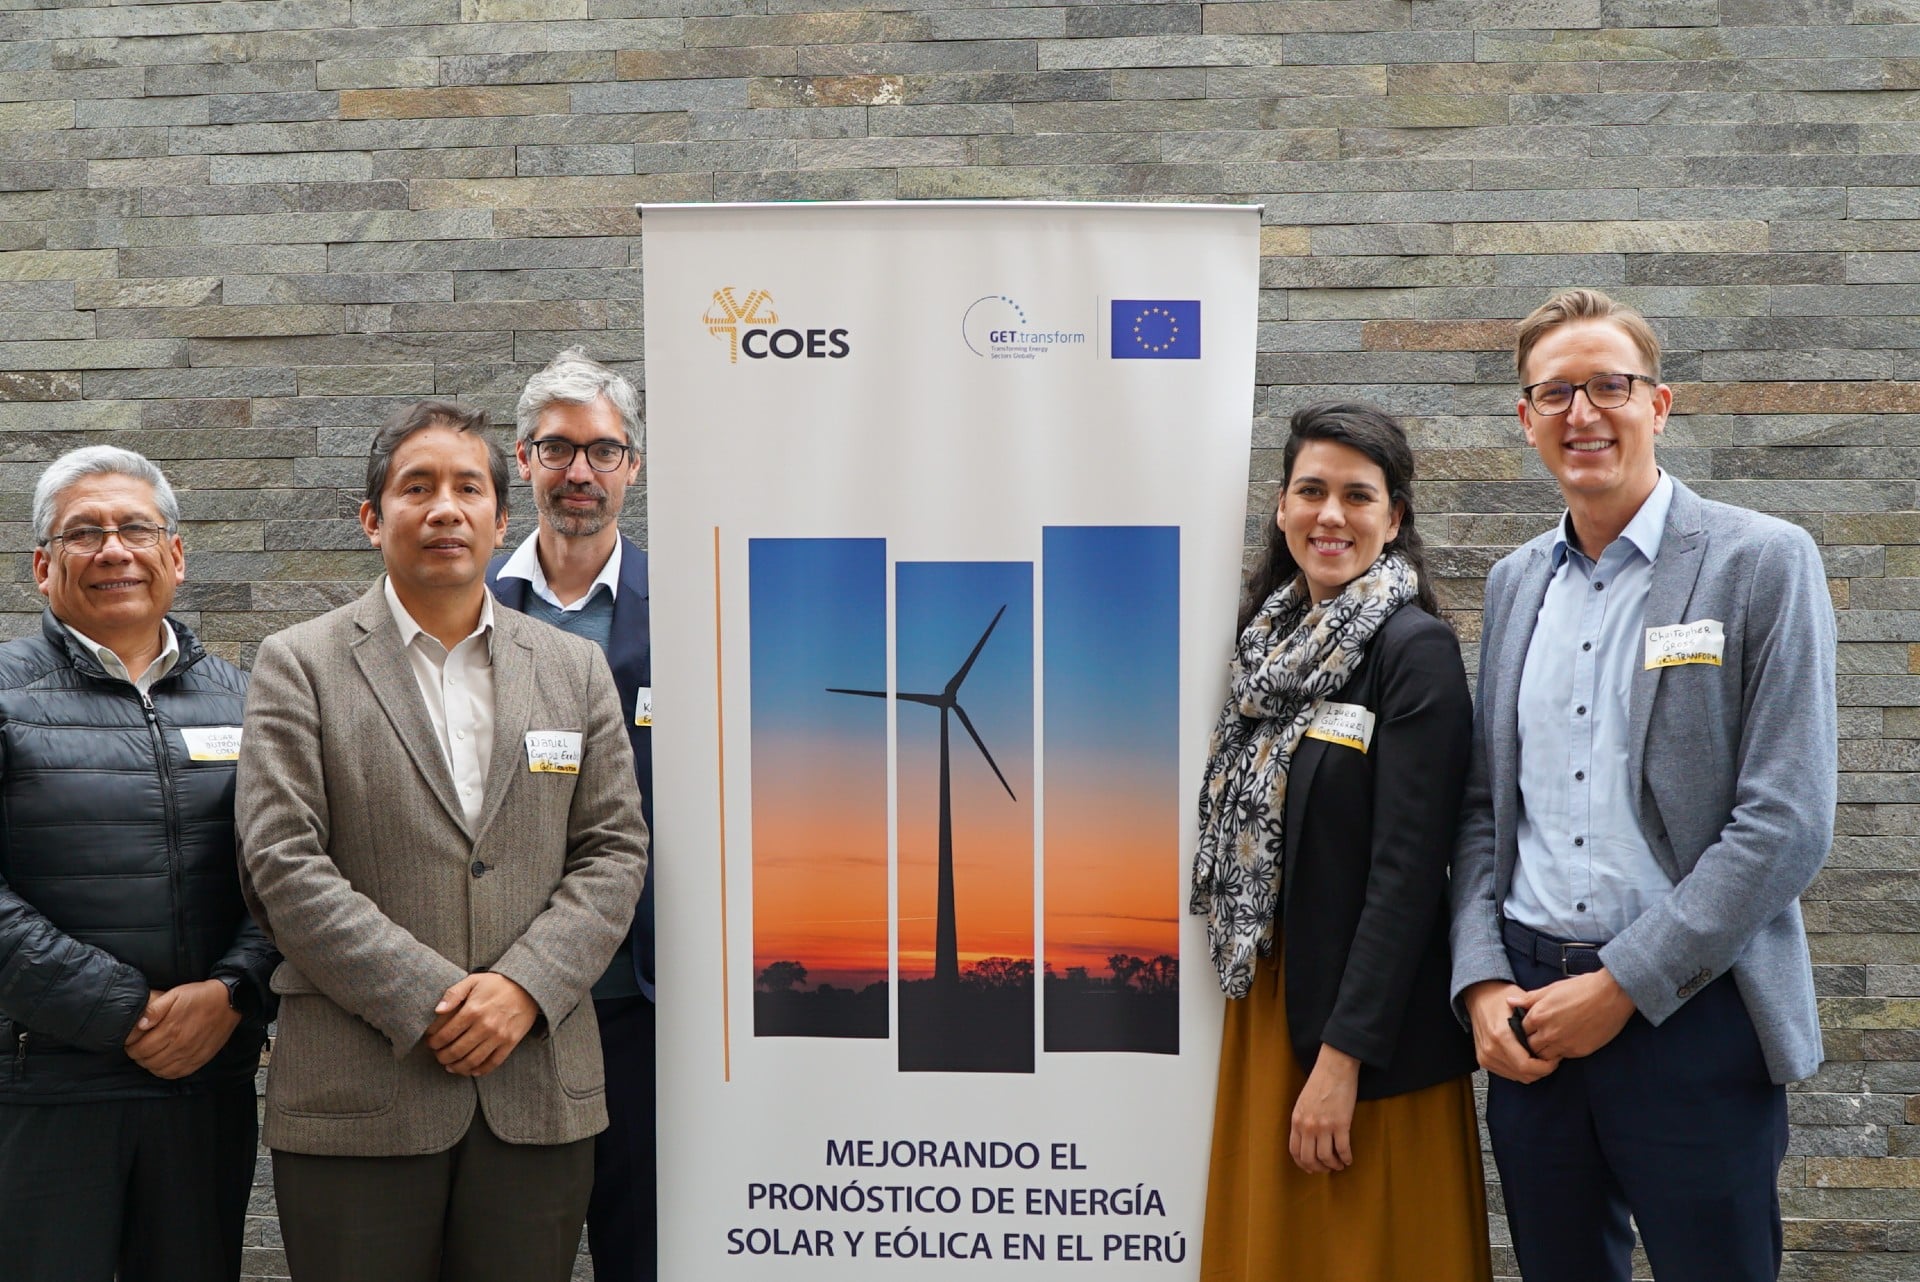 COES CEO César Buttron with GET.transform and Emsys experts at the vRE Forecasting workshop in Lima, Peru, on 10 August 2022.